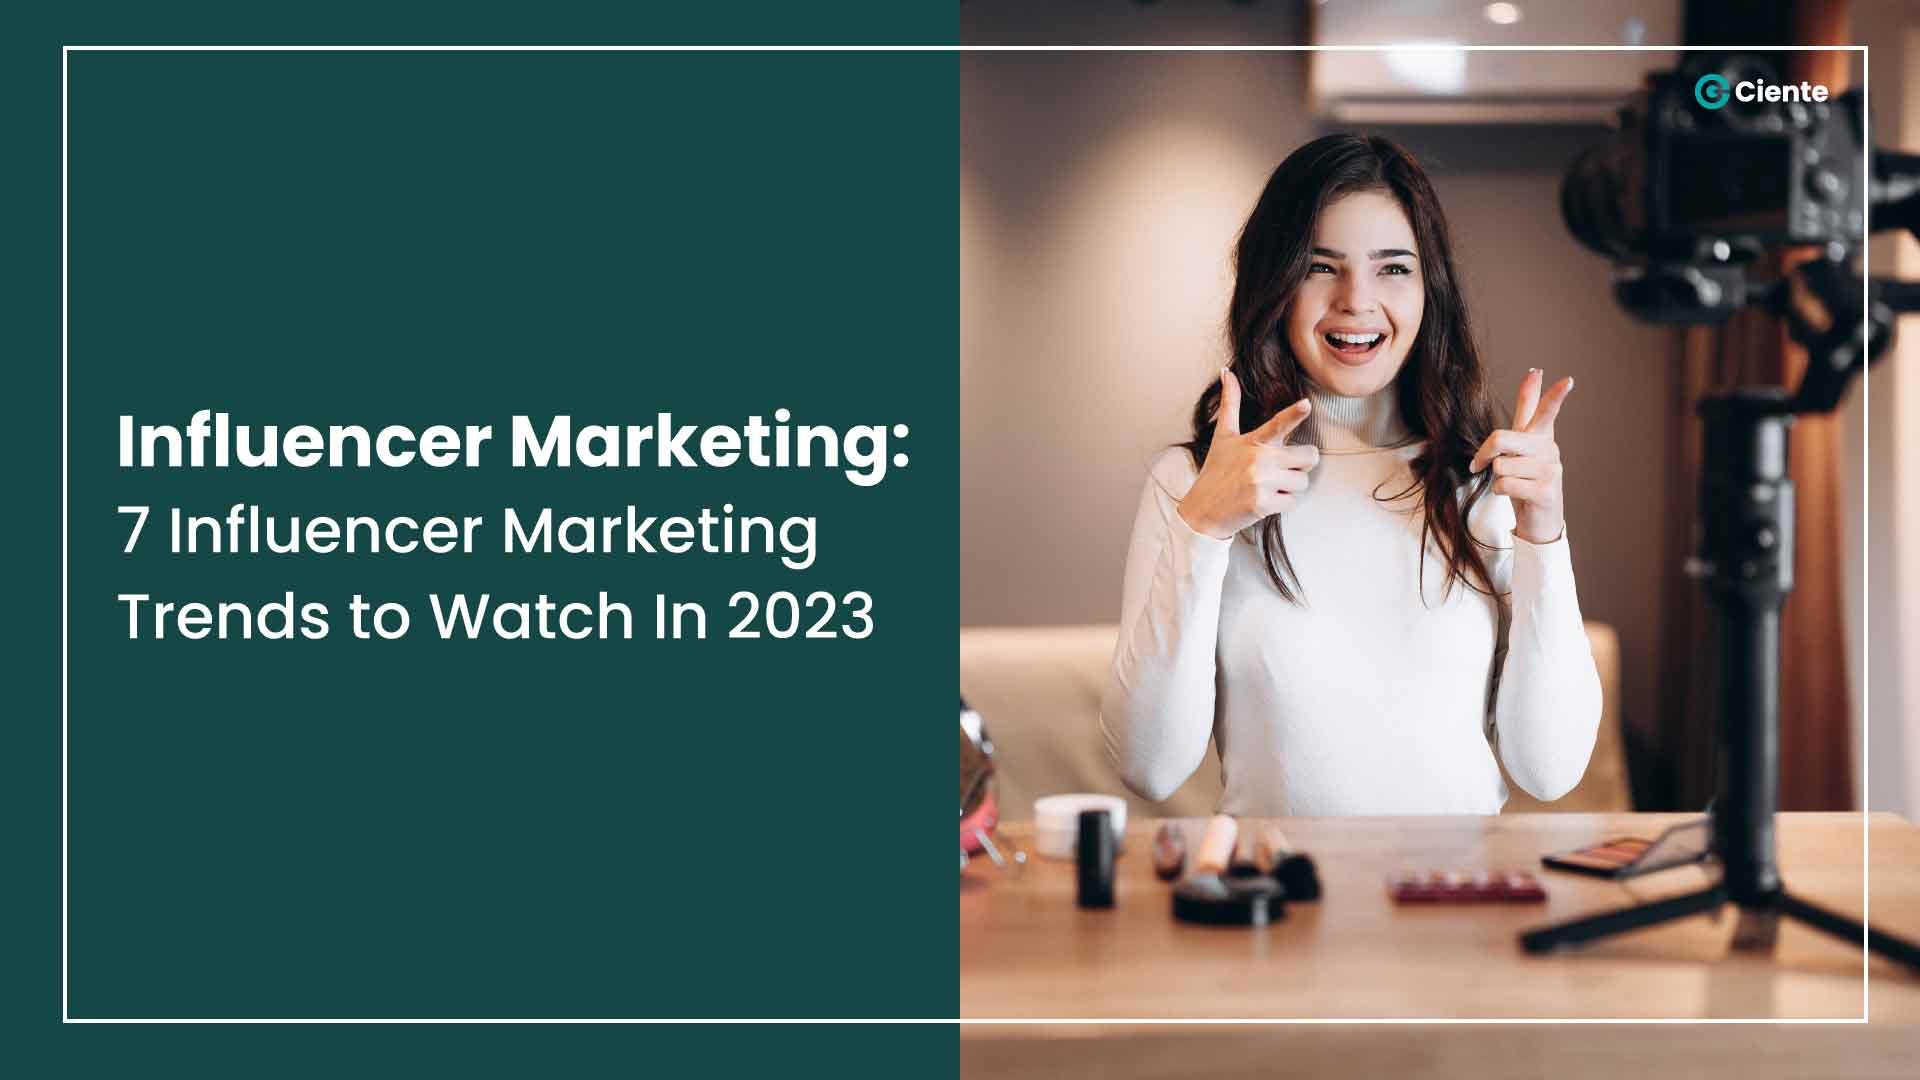 Influencer Marketing: 7 Influencer Marketing Trends to Watch In 2023